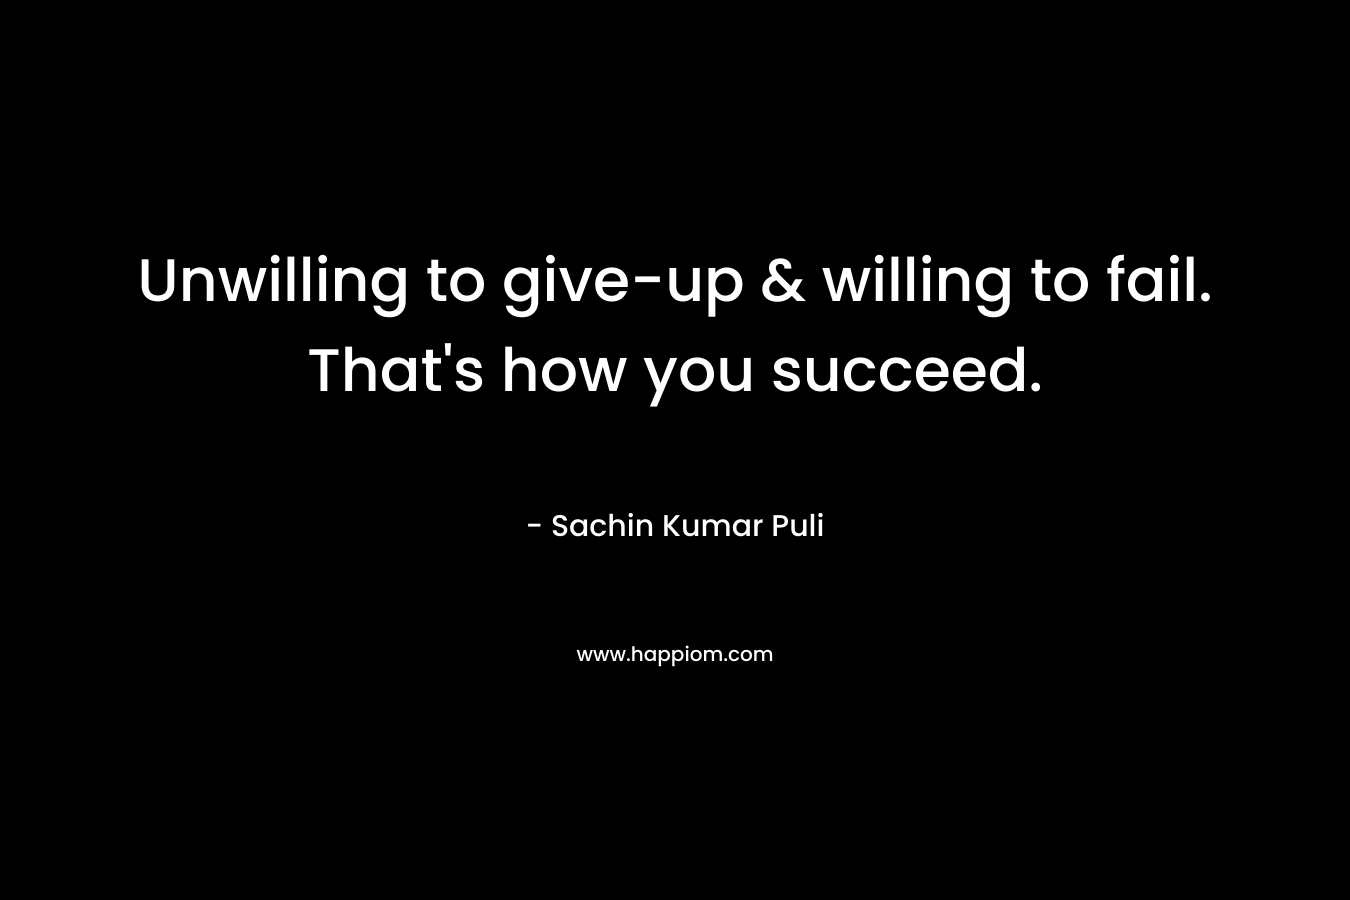 Unwilling to give-up & willing to fail. That’s how you succeed. – Sachin Kumar Puli